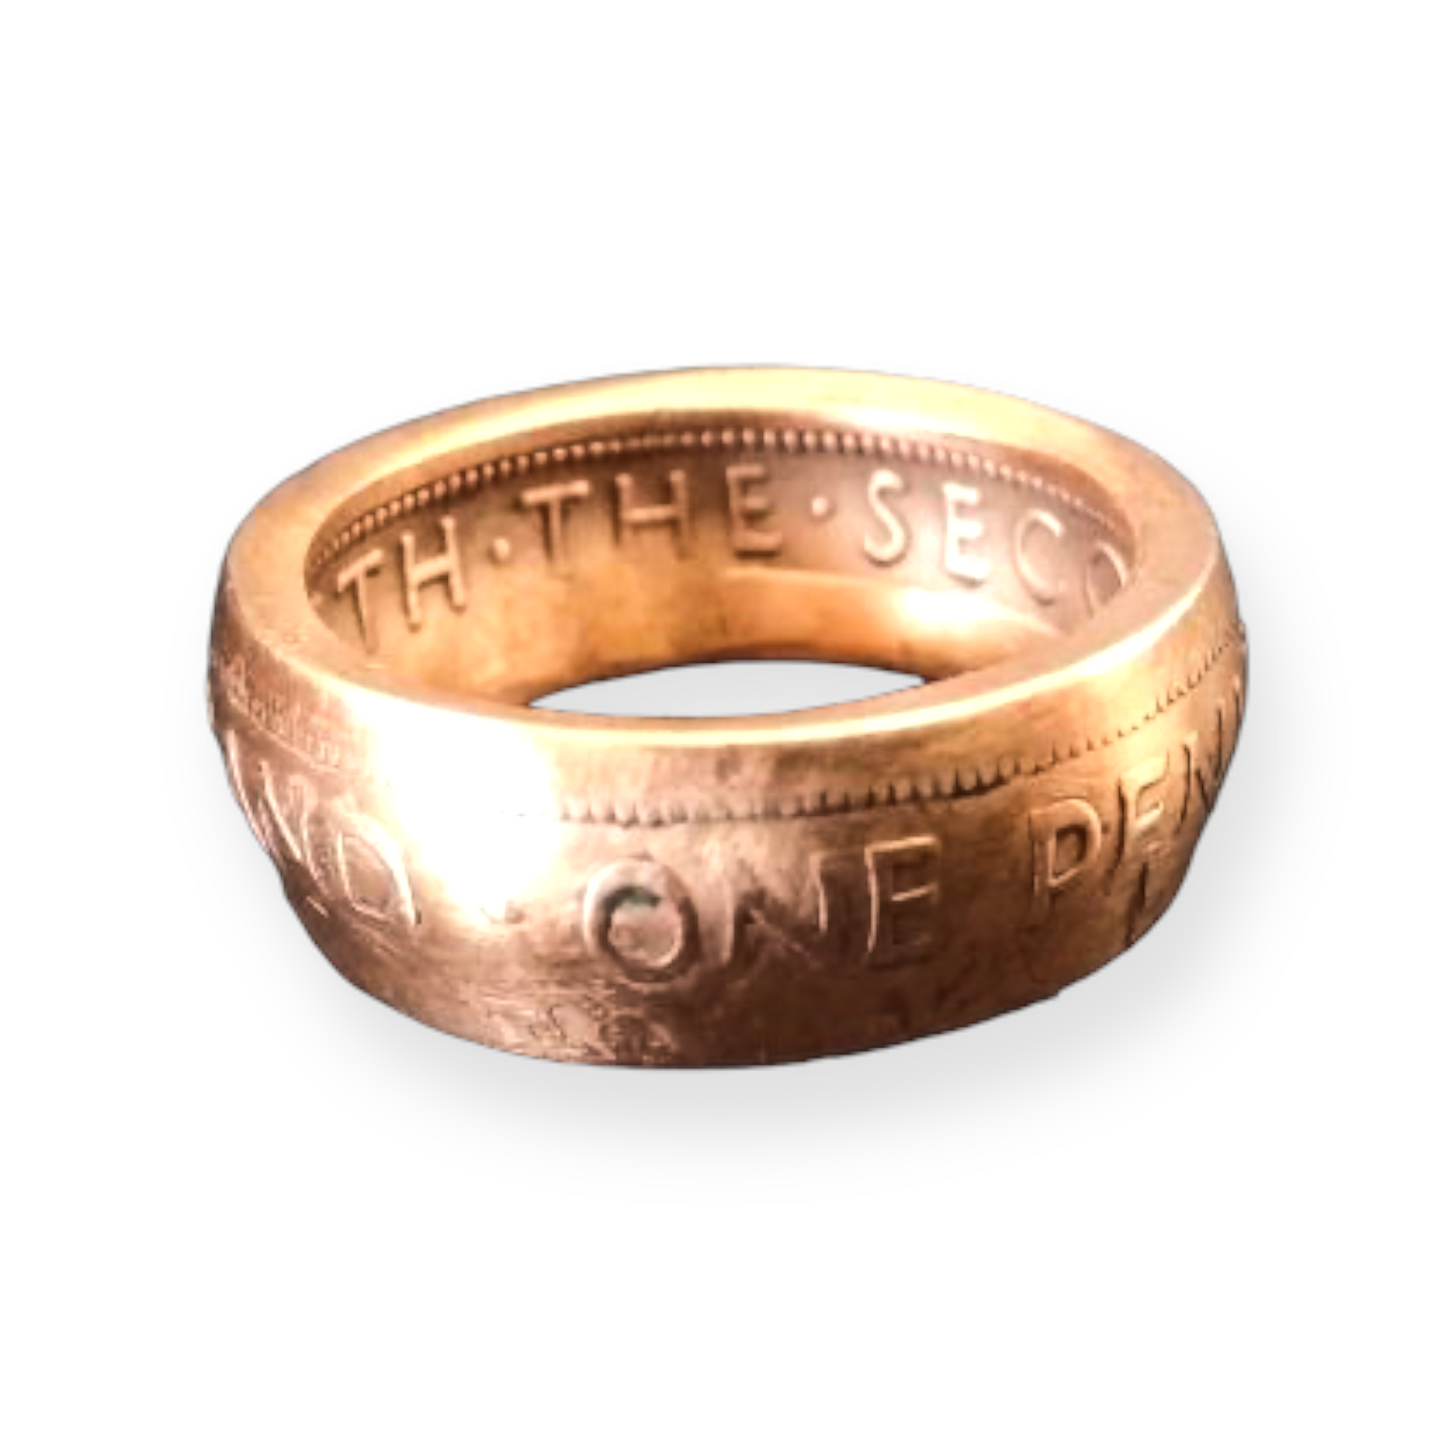 nz copper one penny coin ring